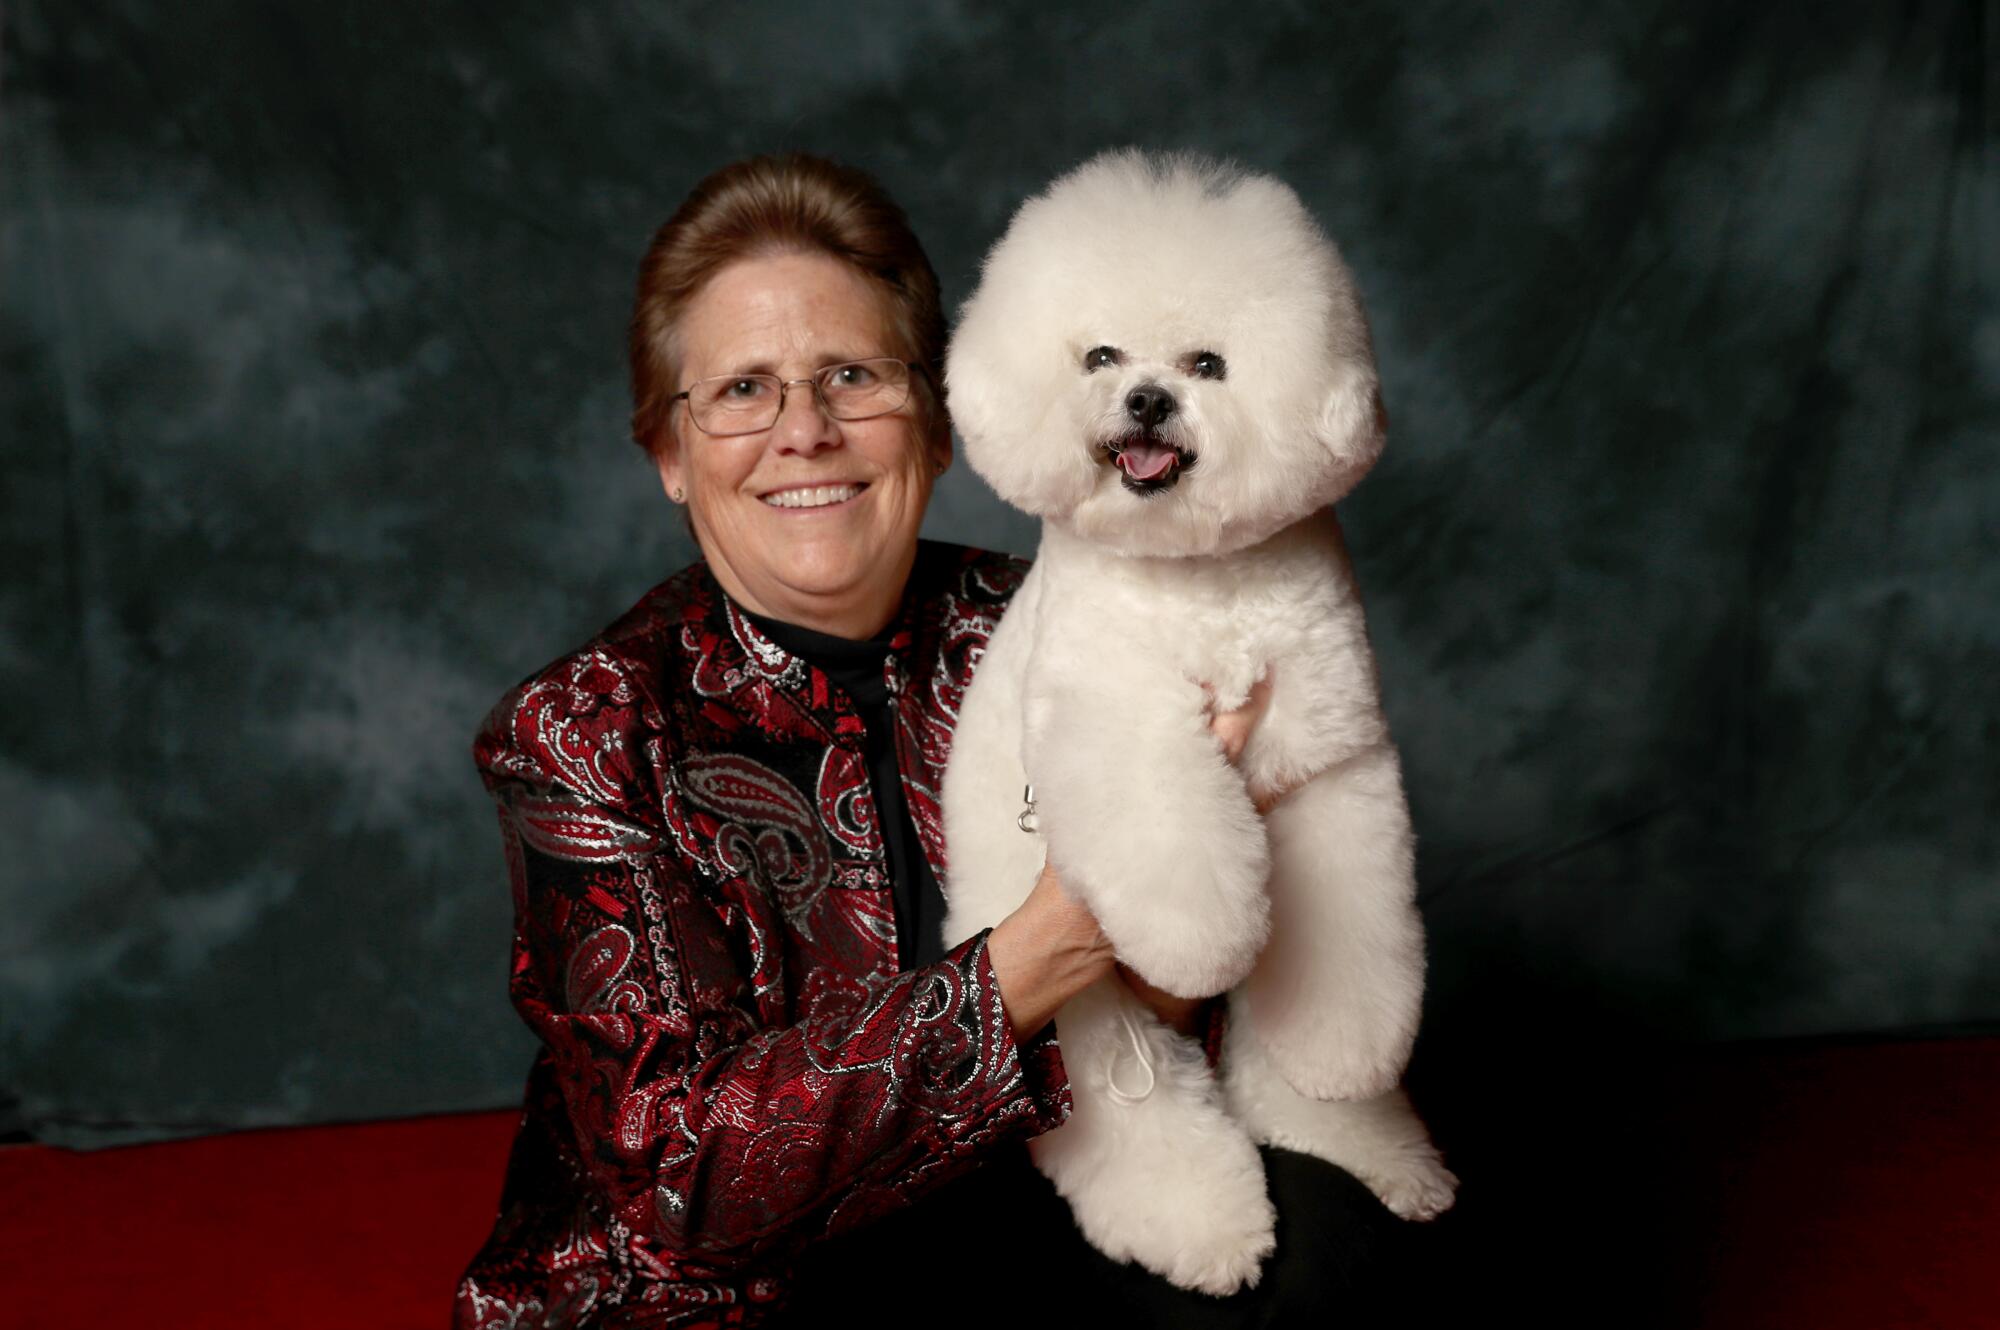 Debbie Gibb, 63, of San Diego, poses with Jack, a bichon frise, at the Kennel Club of Beverly Hills Dog Show